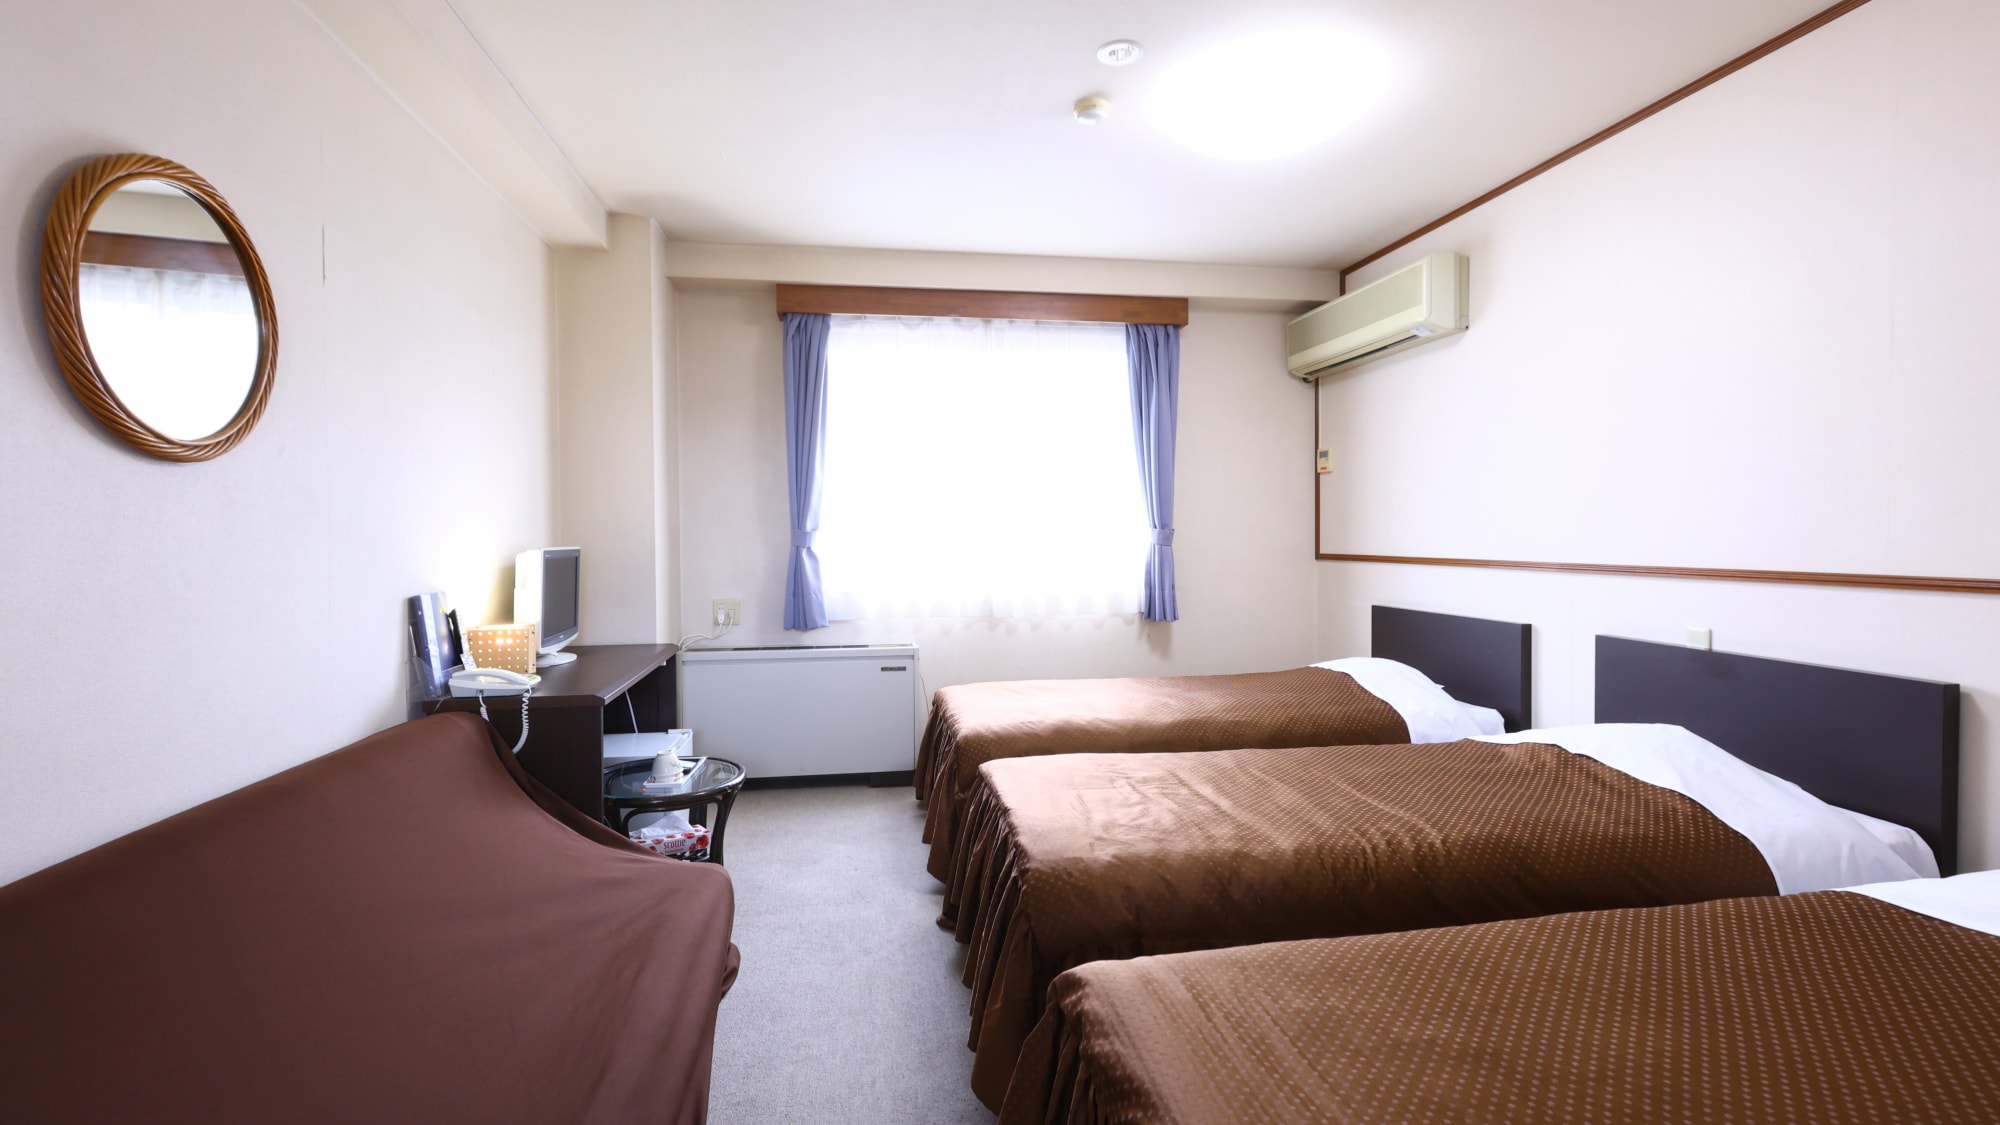 An example of a Western-style triple room. There are 3 regular beds so you can rest comfortably.